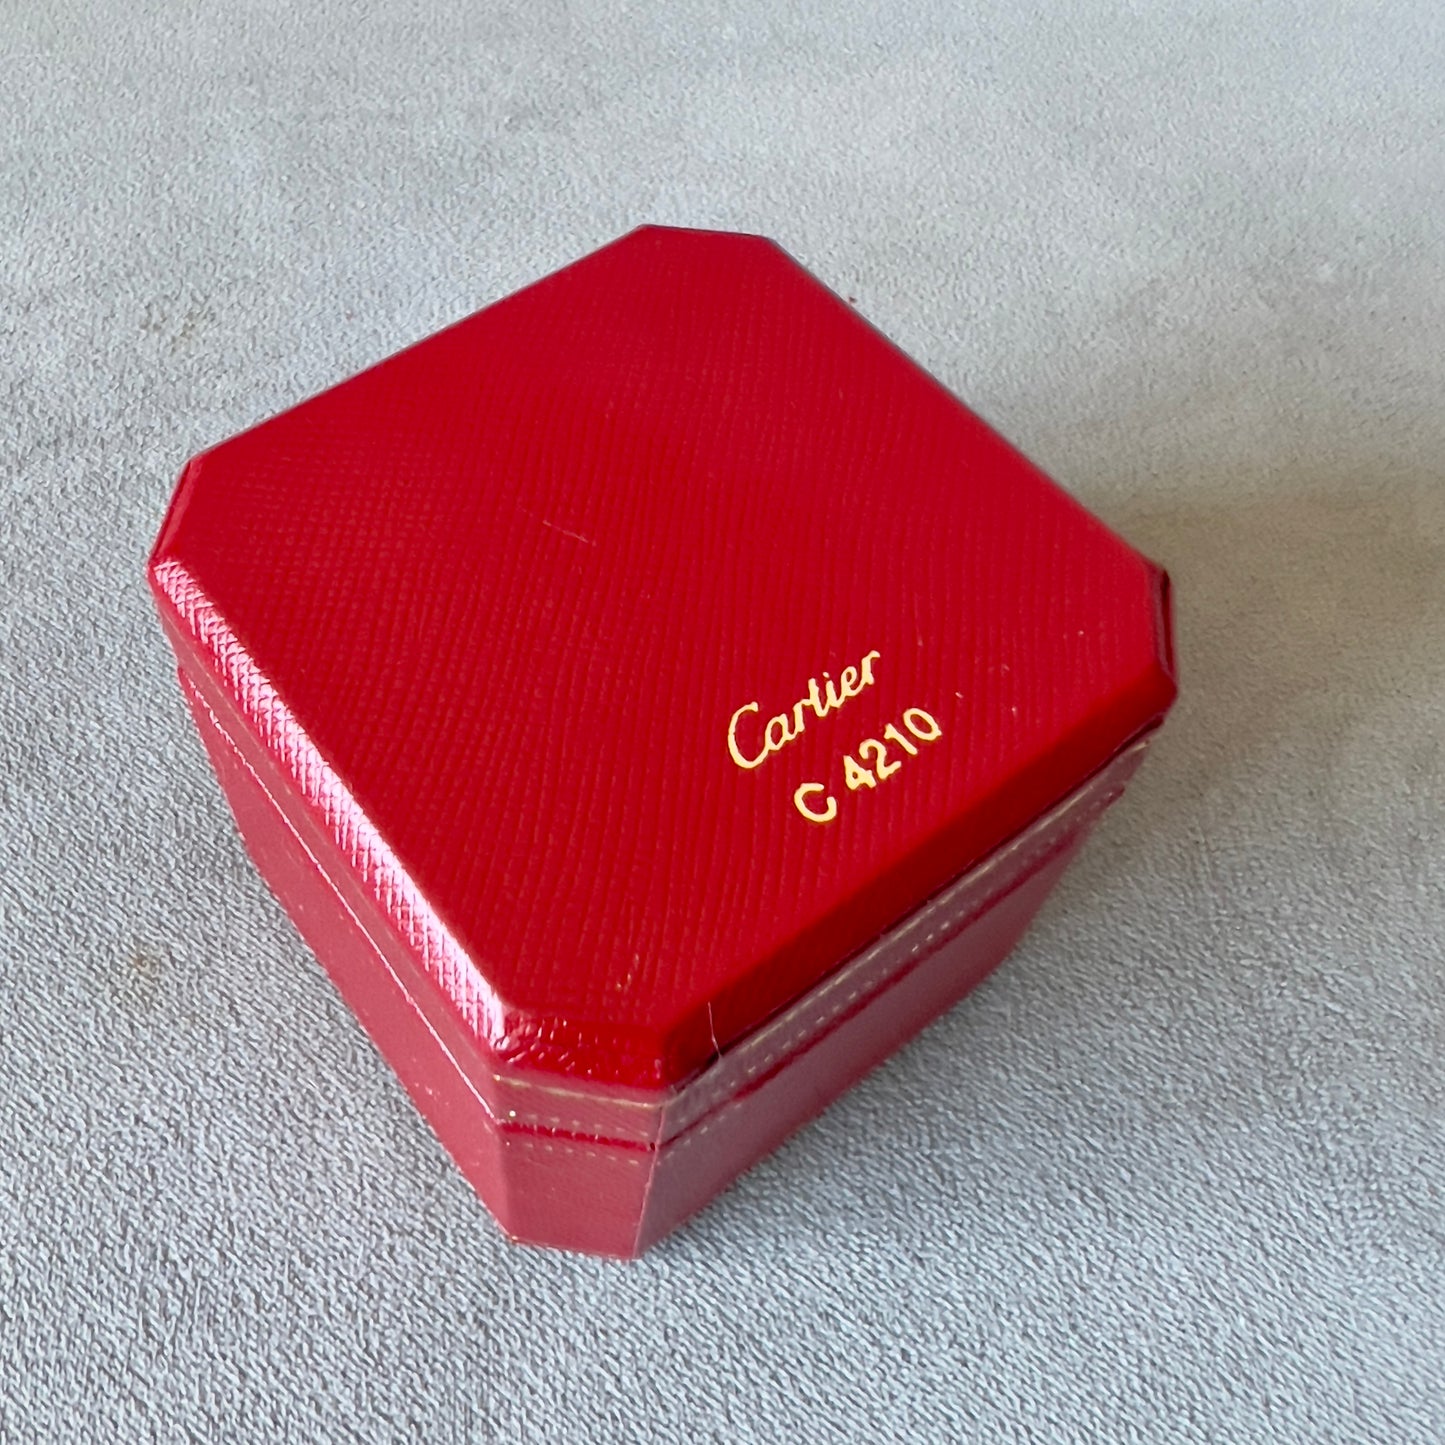 CARTIER Ring Box 2.30x2.30x2.10 inches